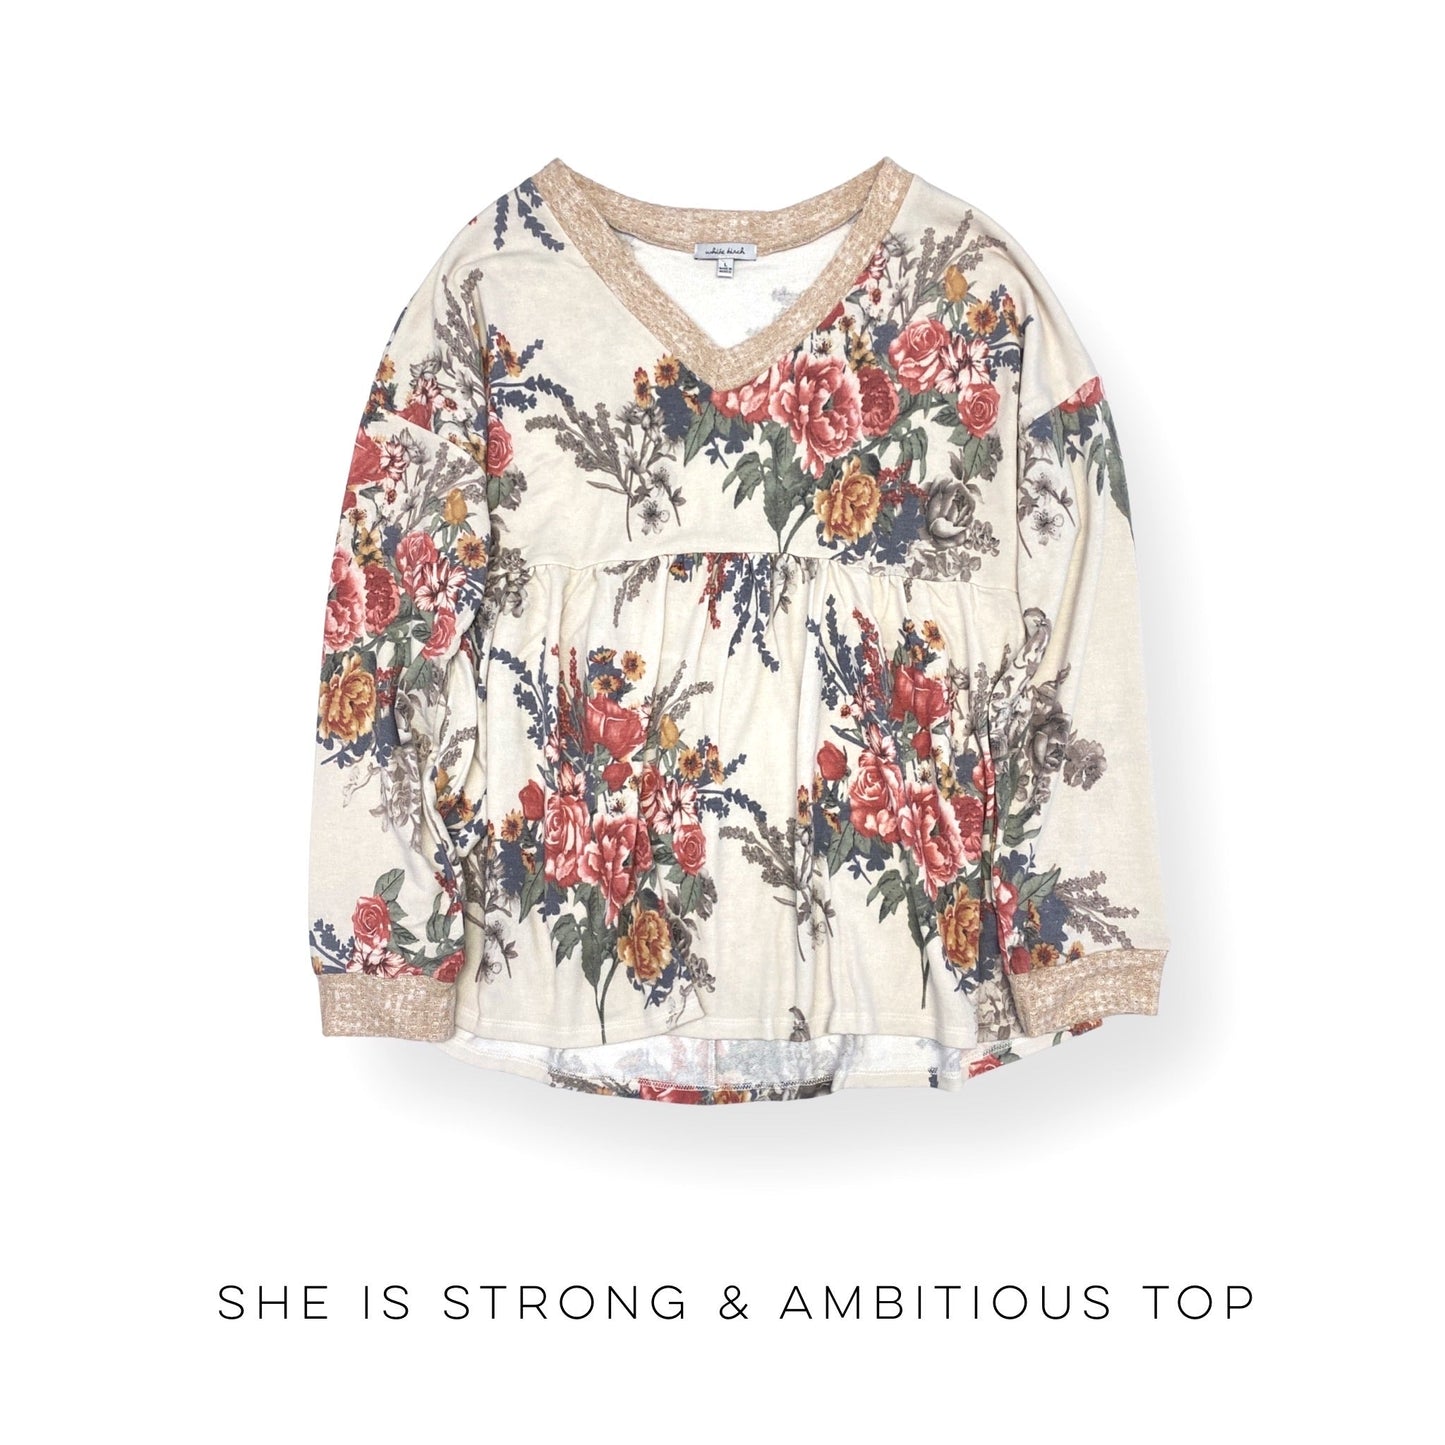 She is Strong & Ambitious Top